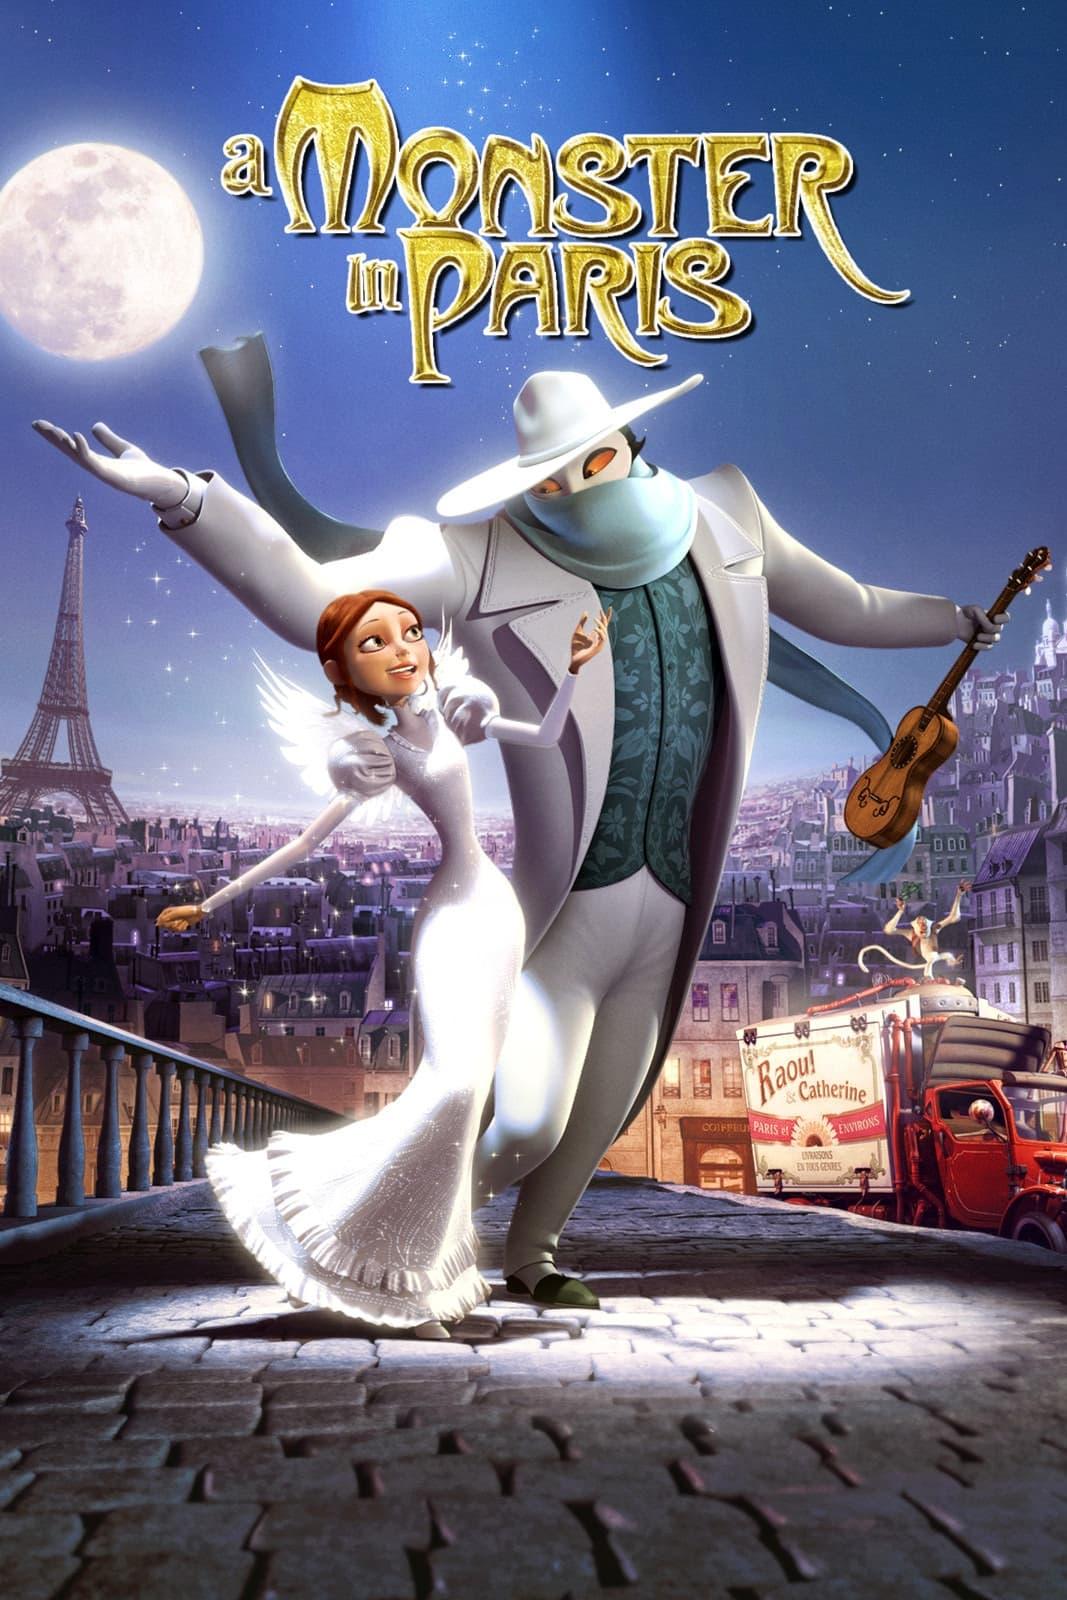 A Monster in Paris poster